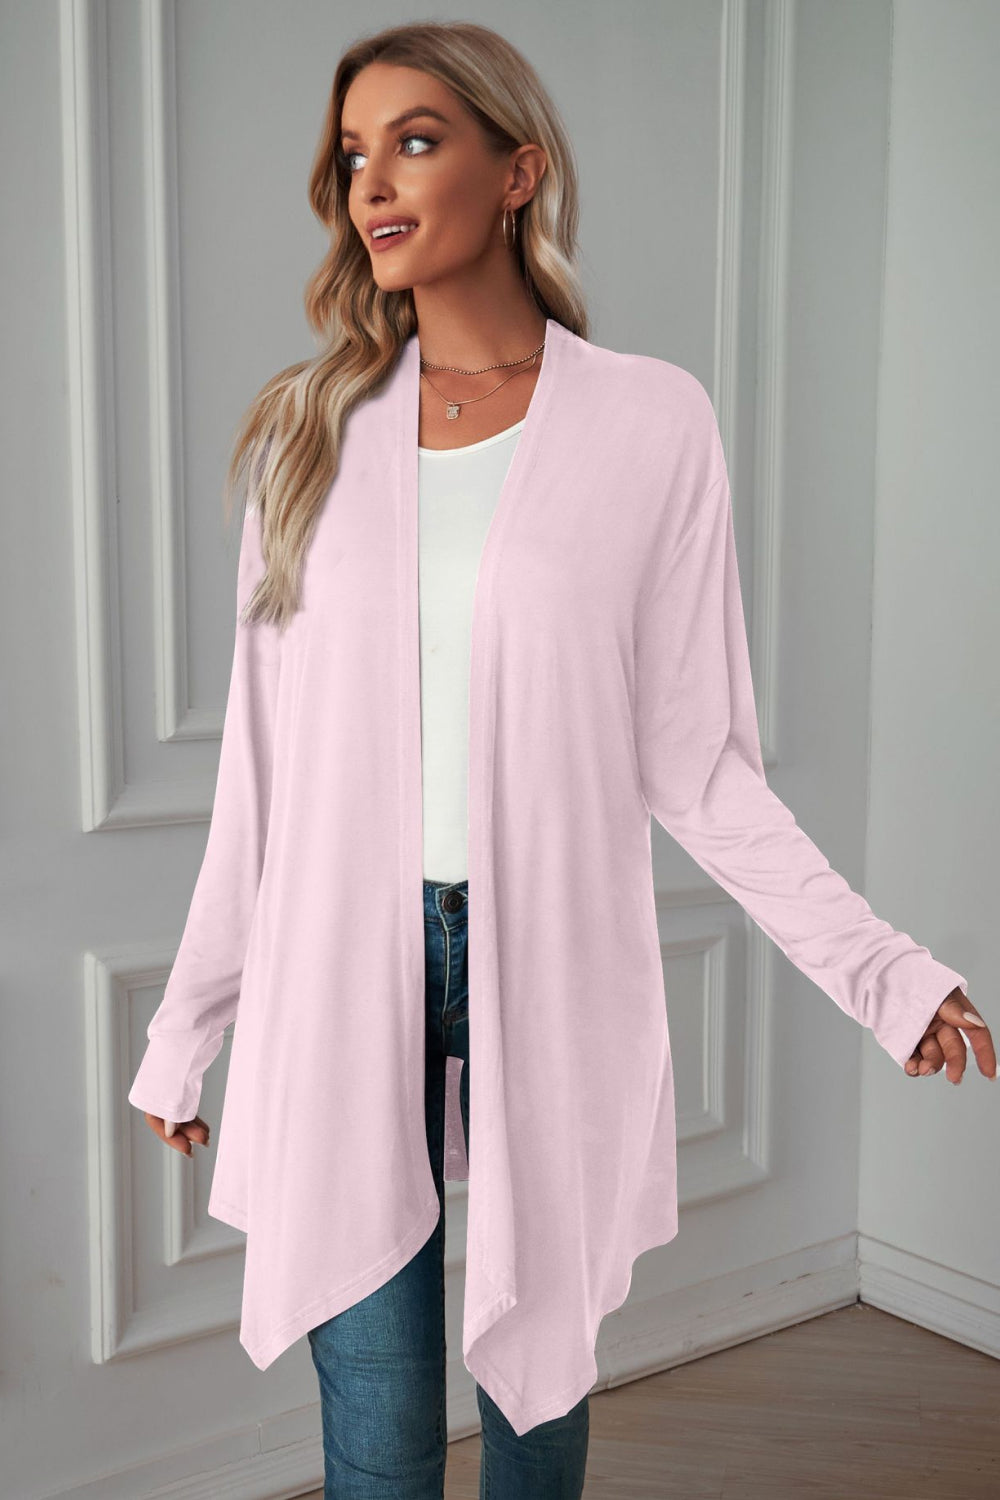 Open Front Long Sleeve Cardigan - Women’s Clothing & Accessories - Shirts & Tops - 10 - 2024